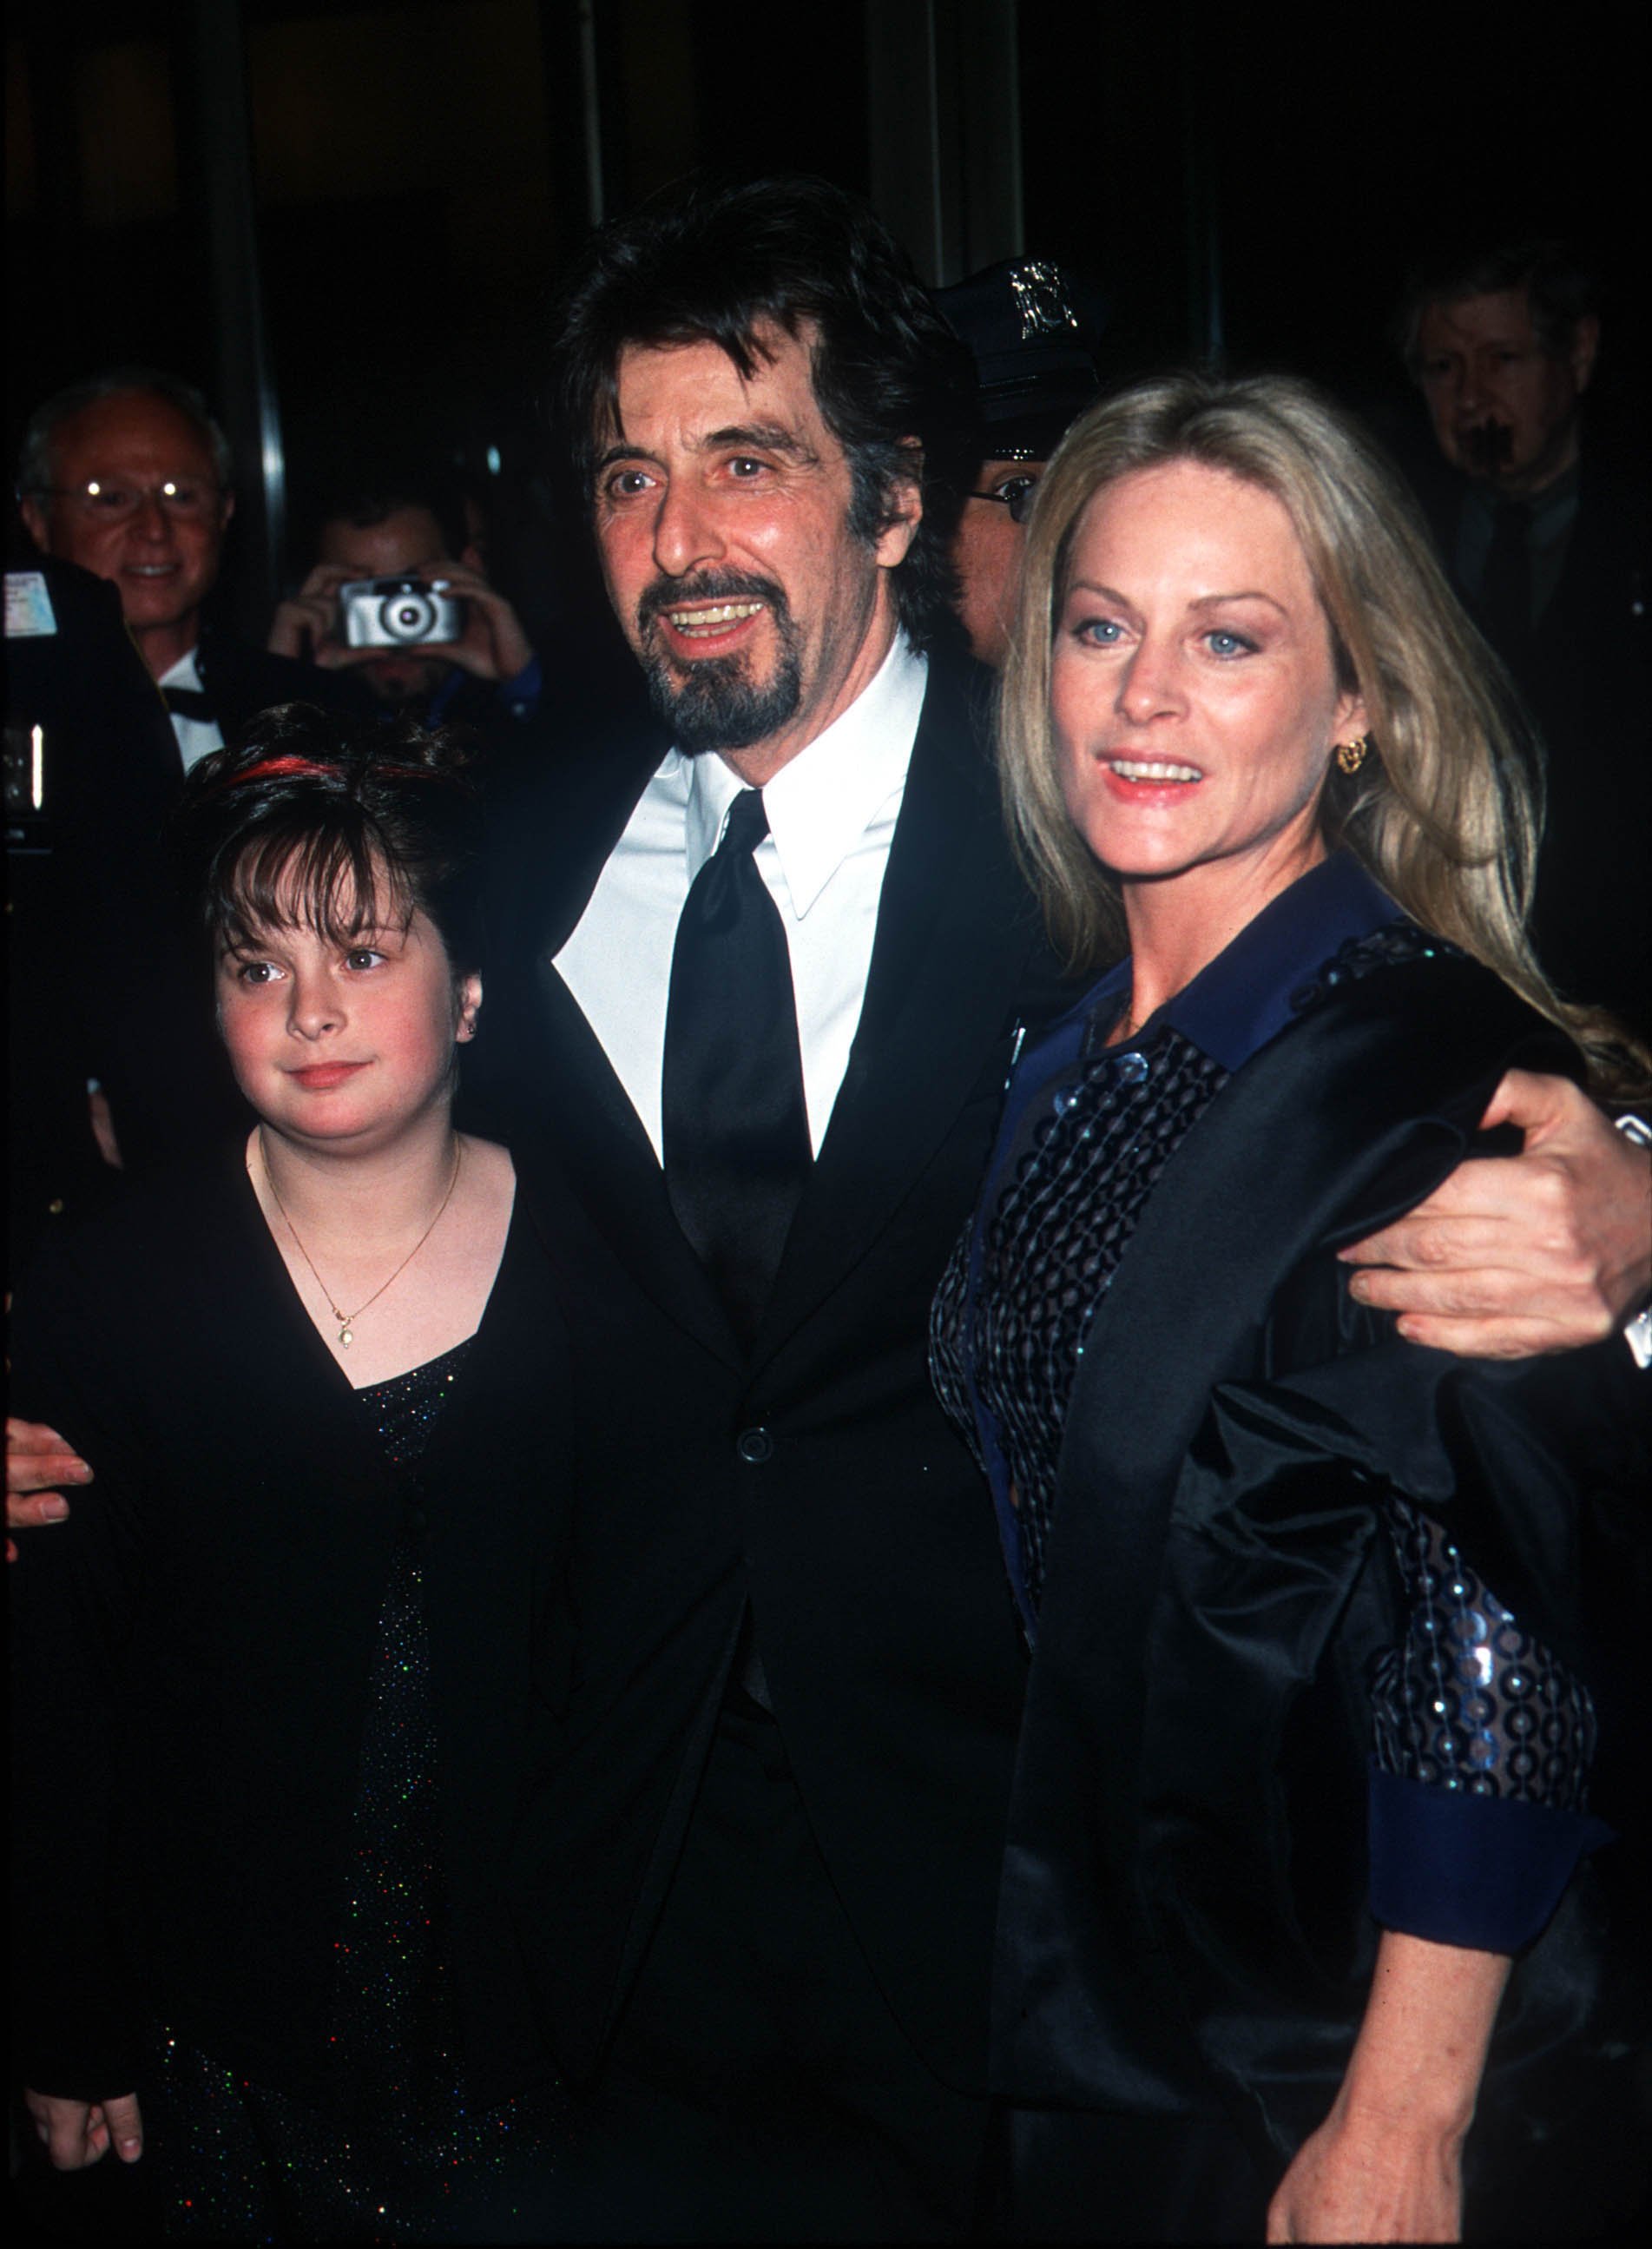 Al Pacino with girlfriend Beverly D'Angelo and his daughter Julie Pacino at New York City The Film Society of Lincoln Center Gala Tribute to Al Pacino at Avery Fisher Hall, 2000 | Source: Getty Images